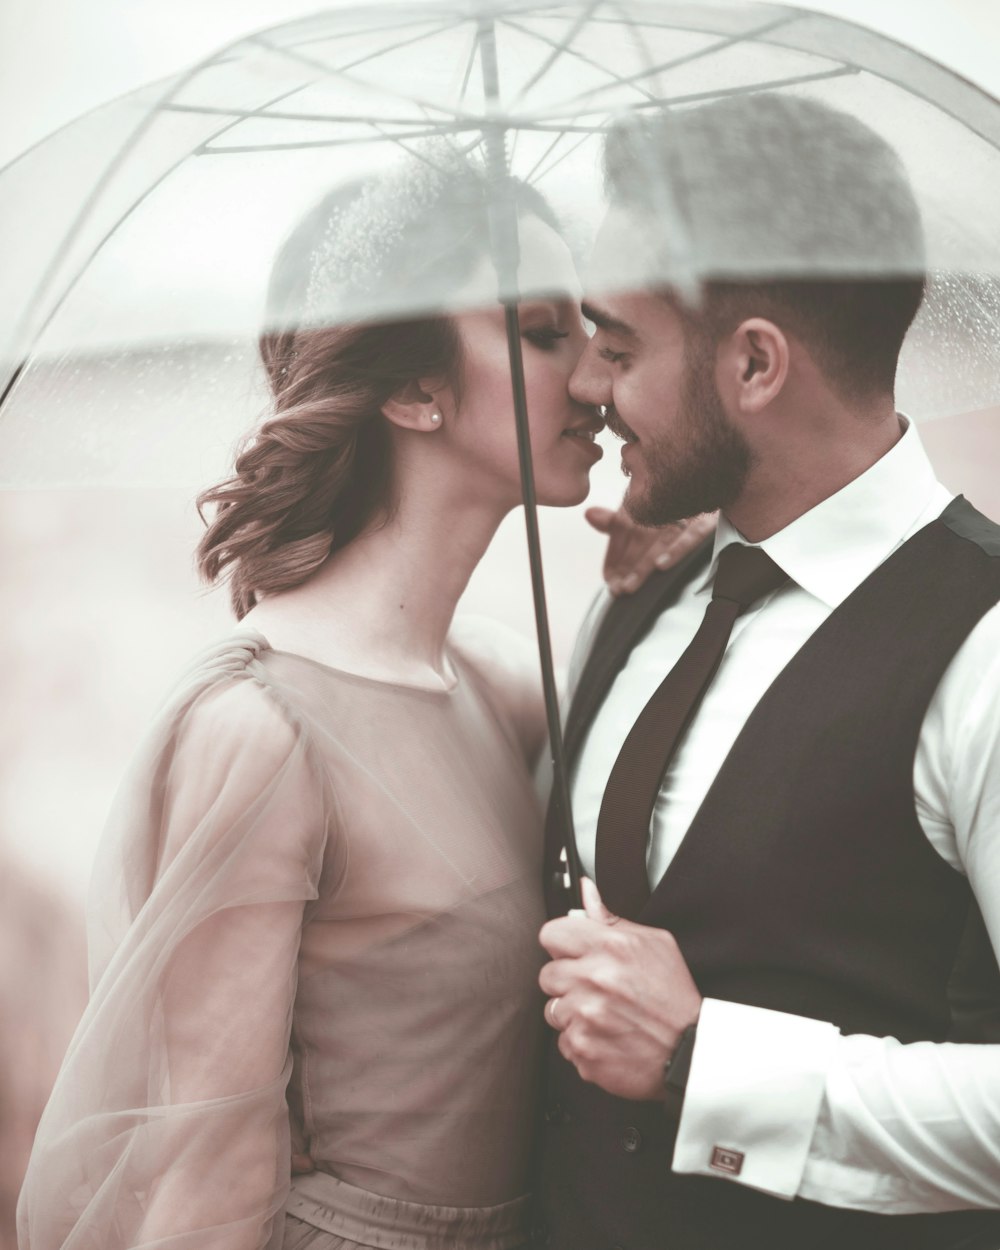 woman and man about to kiss under umbrella